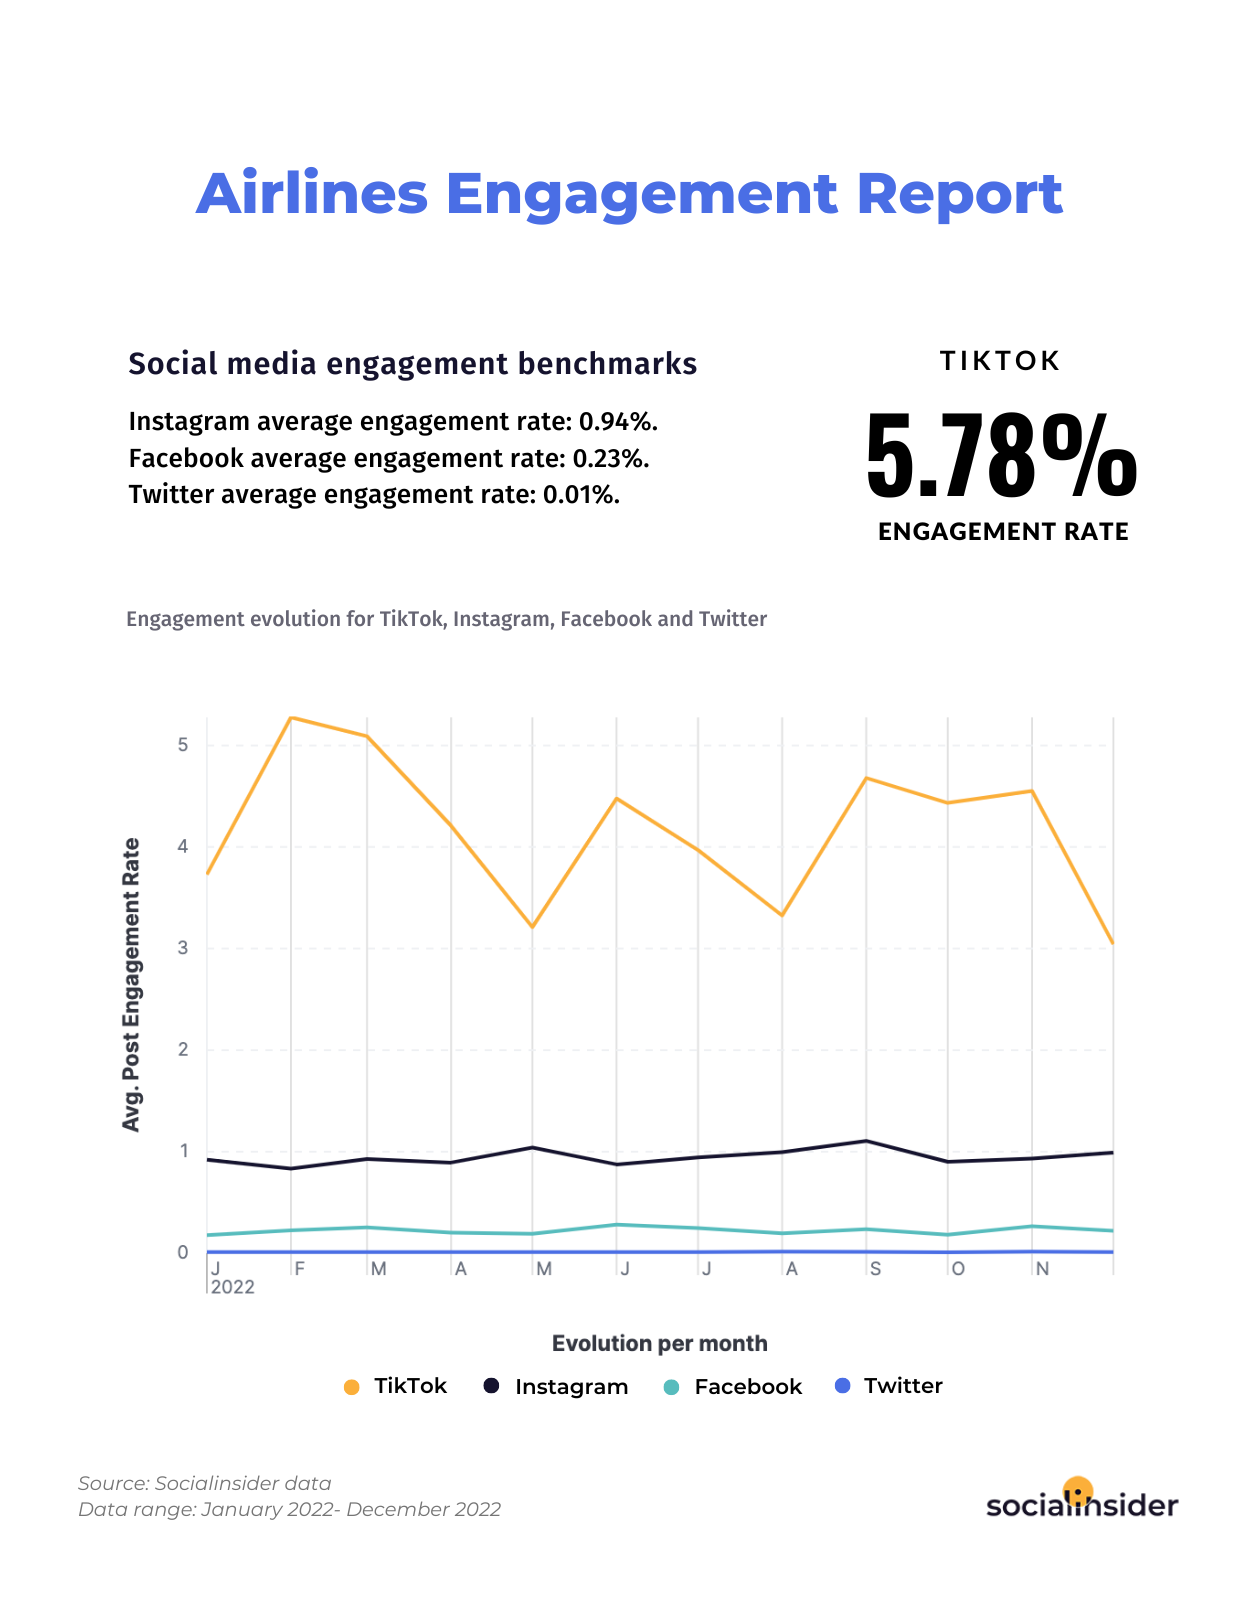 This is a chart indicating social media performance benchmarks for brands within the airlines' industry.